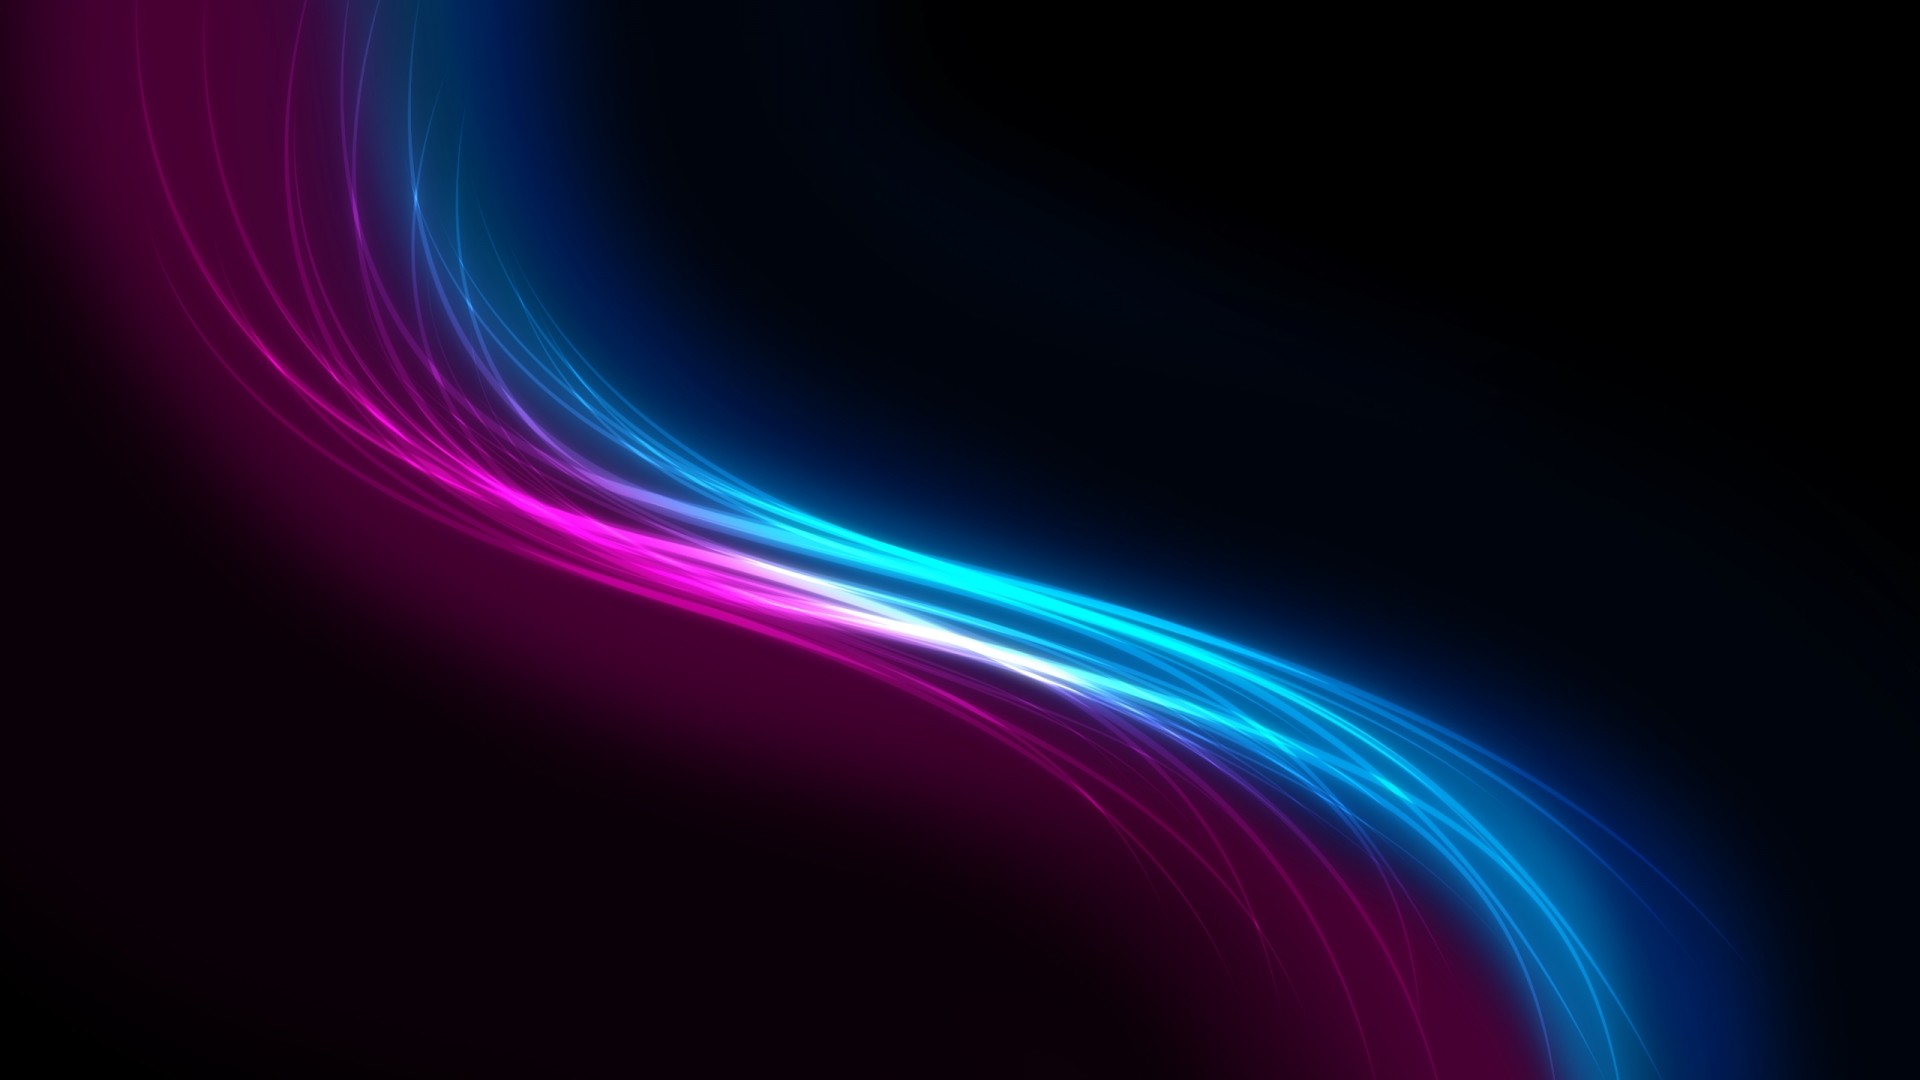 Collection of Black Backgrounds Wallpapers on Spyder Wallpapers